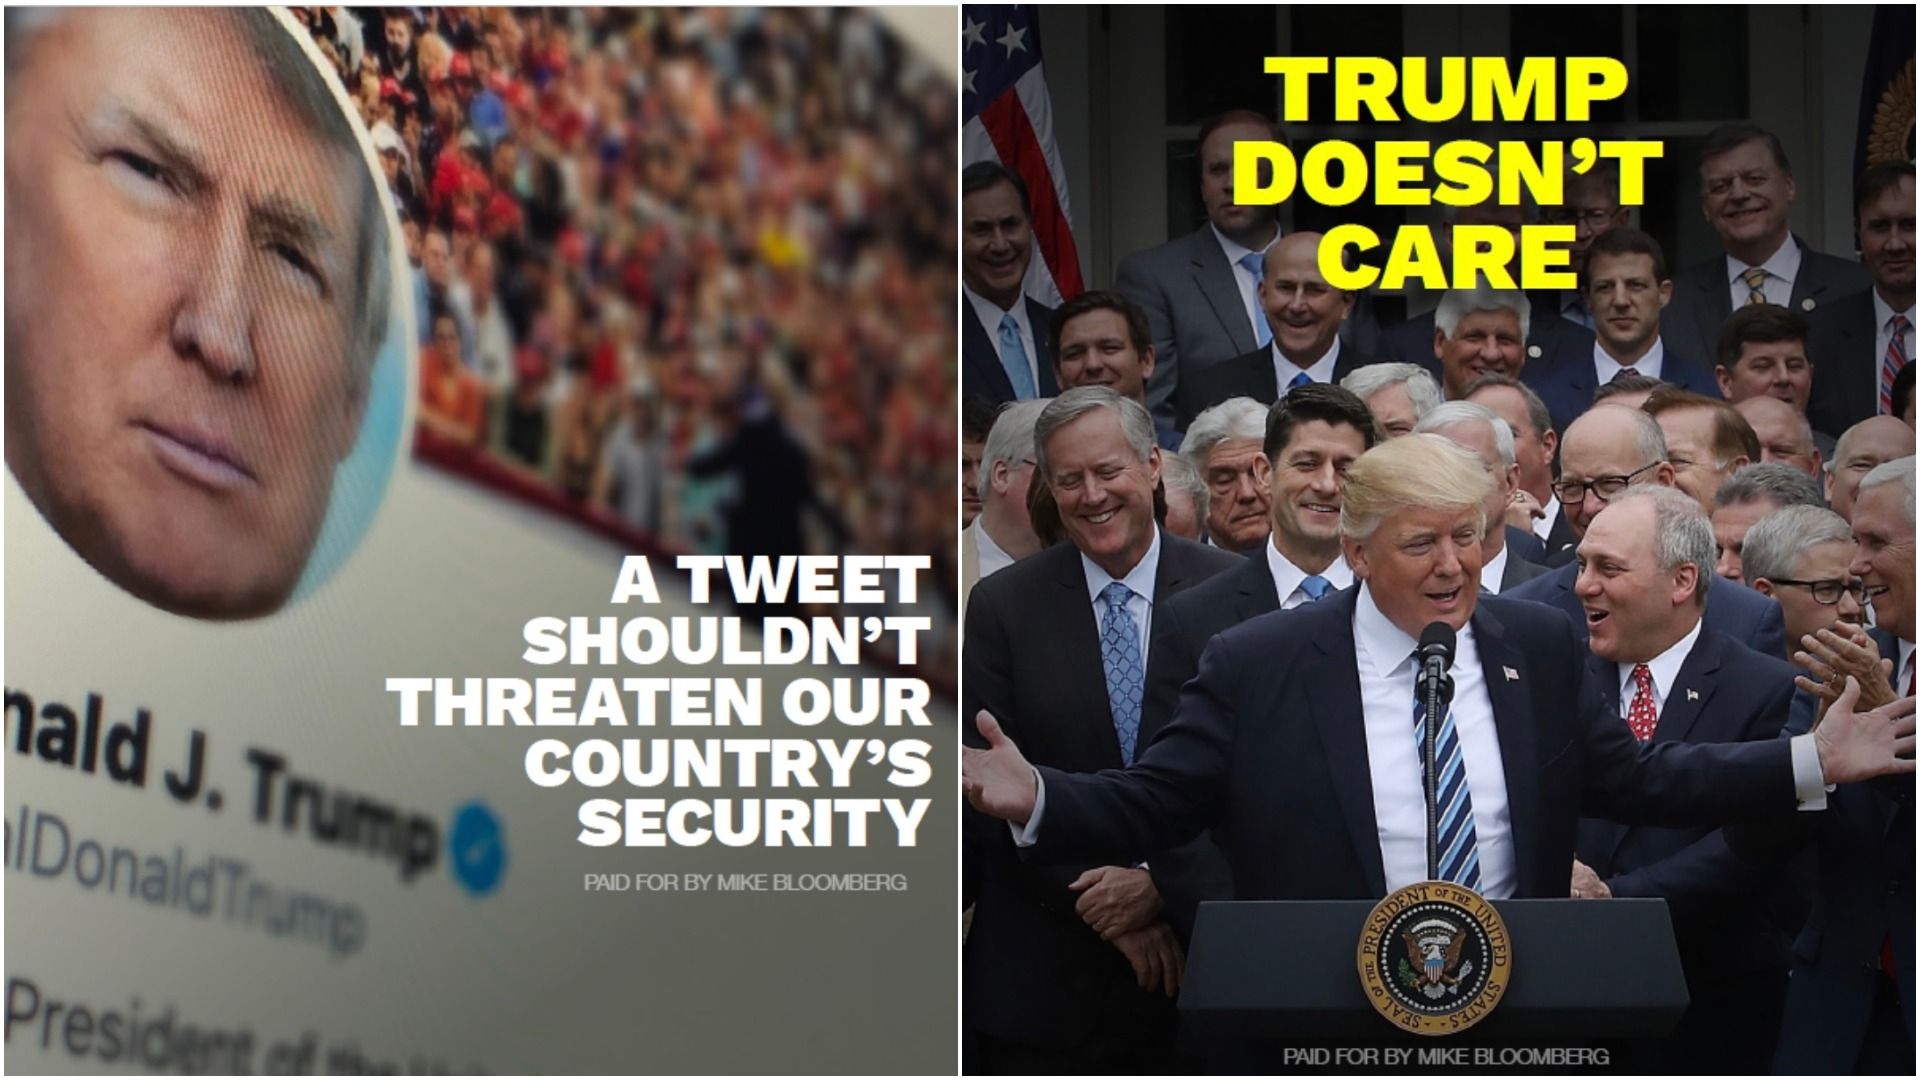 Still video images of President Trump with the caption "Trump doesn't care"